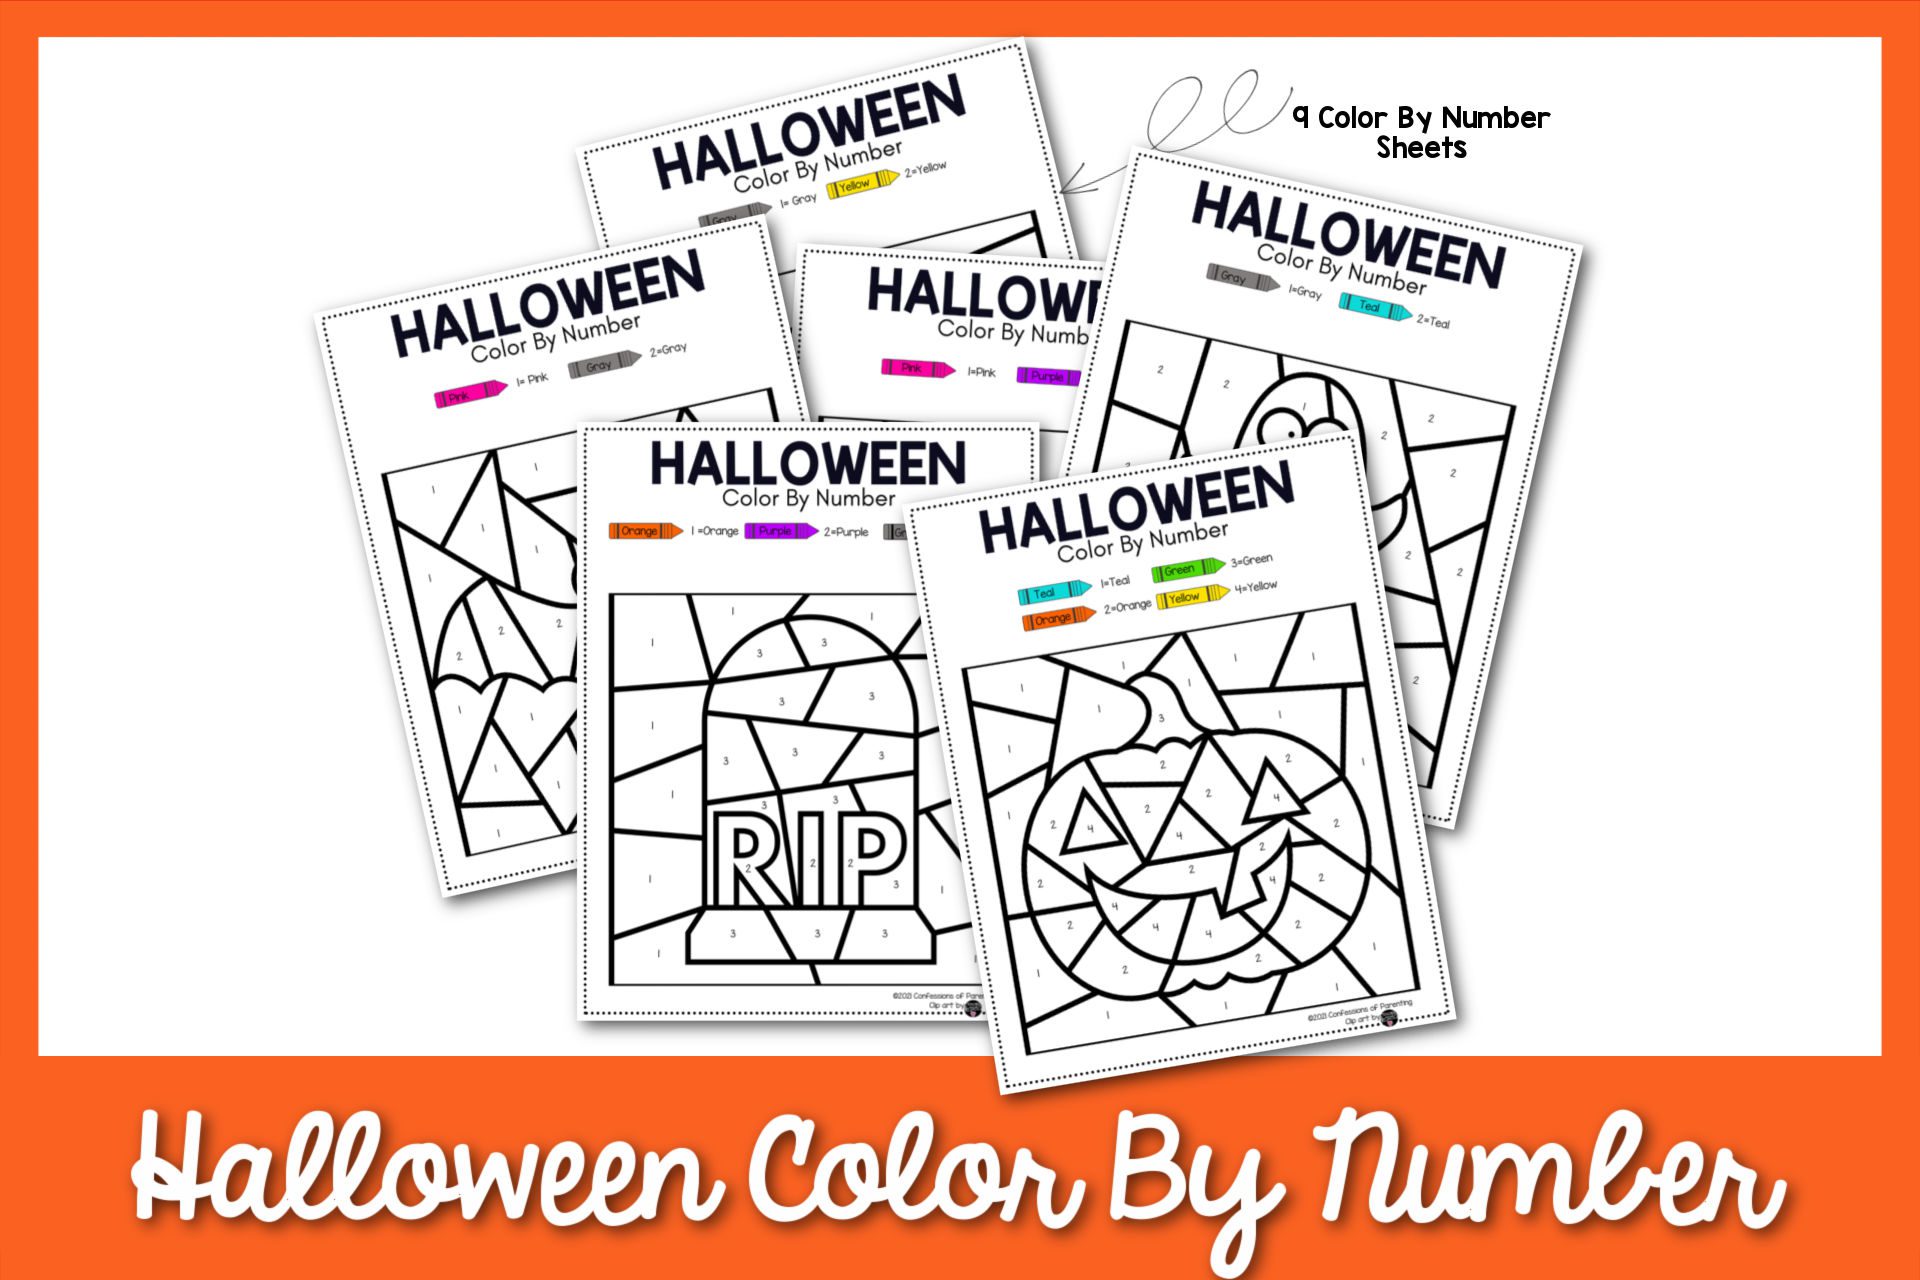 Feature: Halloween color by number printables with orange border